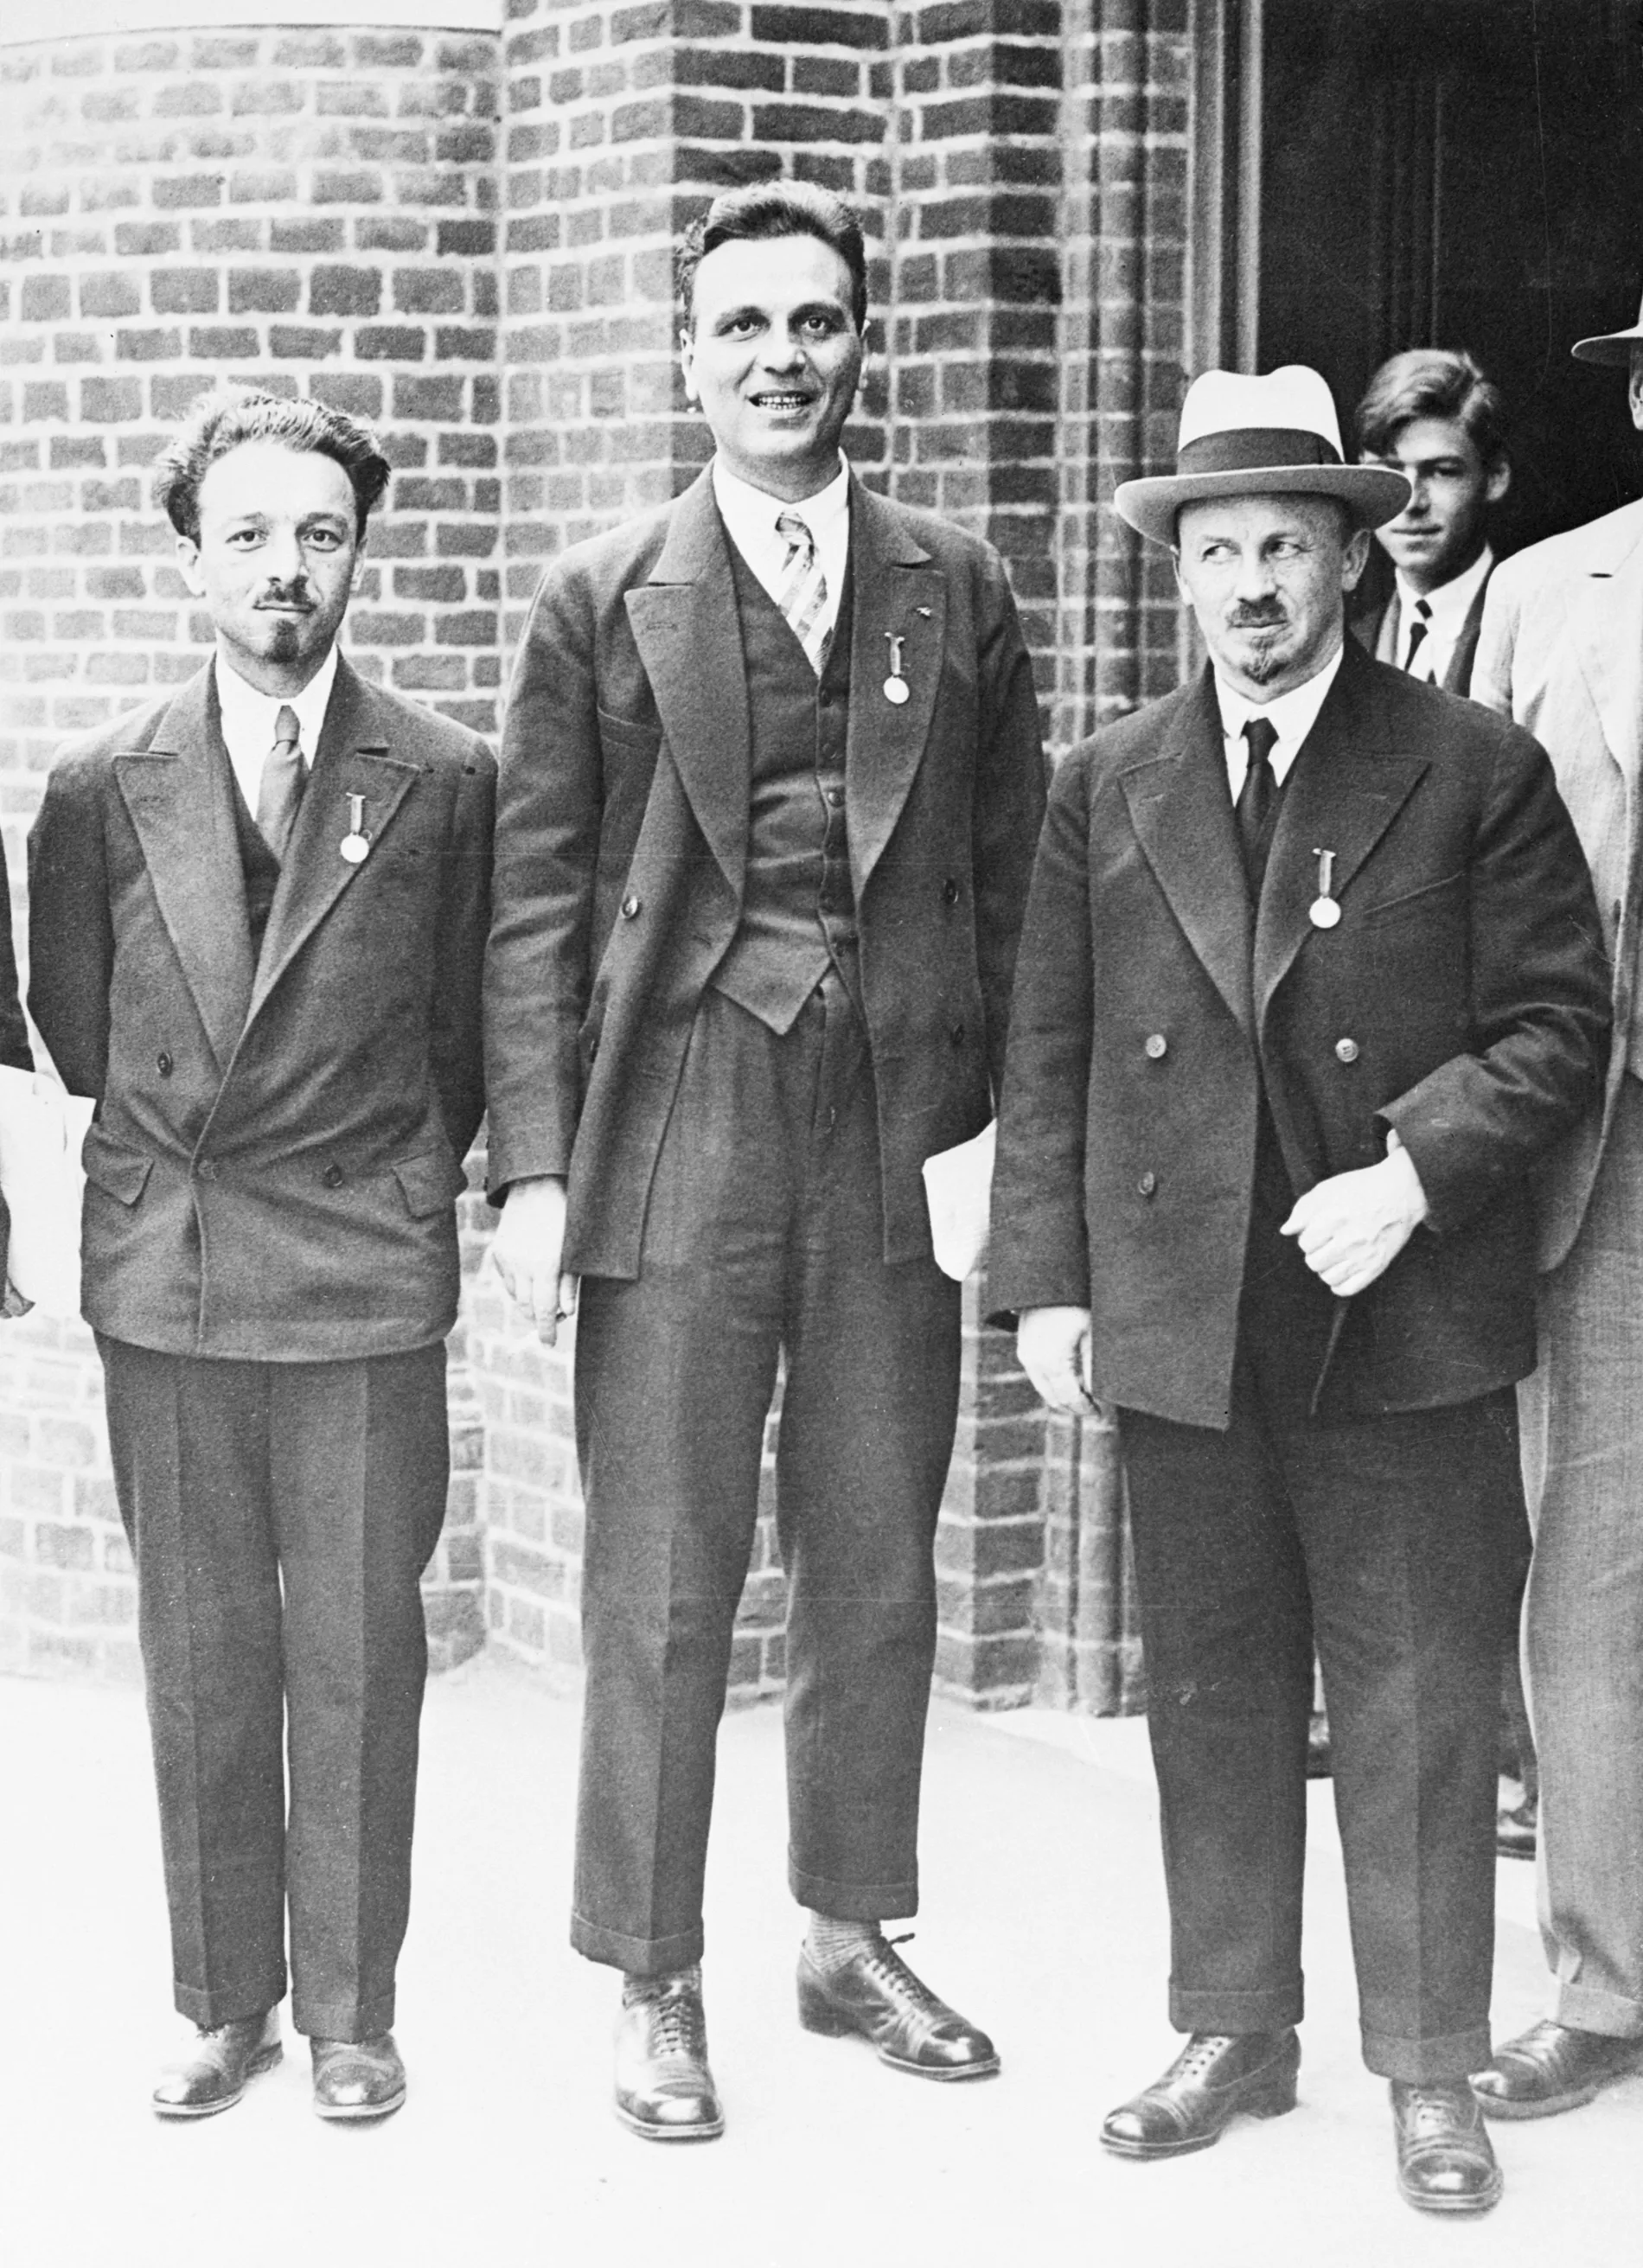 1931-London, England: Left to right: Professor Nikolai Vavilov (Botanist)), A. F. Joffe (Physicist), and Nicholas Bukharin in London to attend the Congress of the History of Science. 